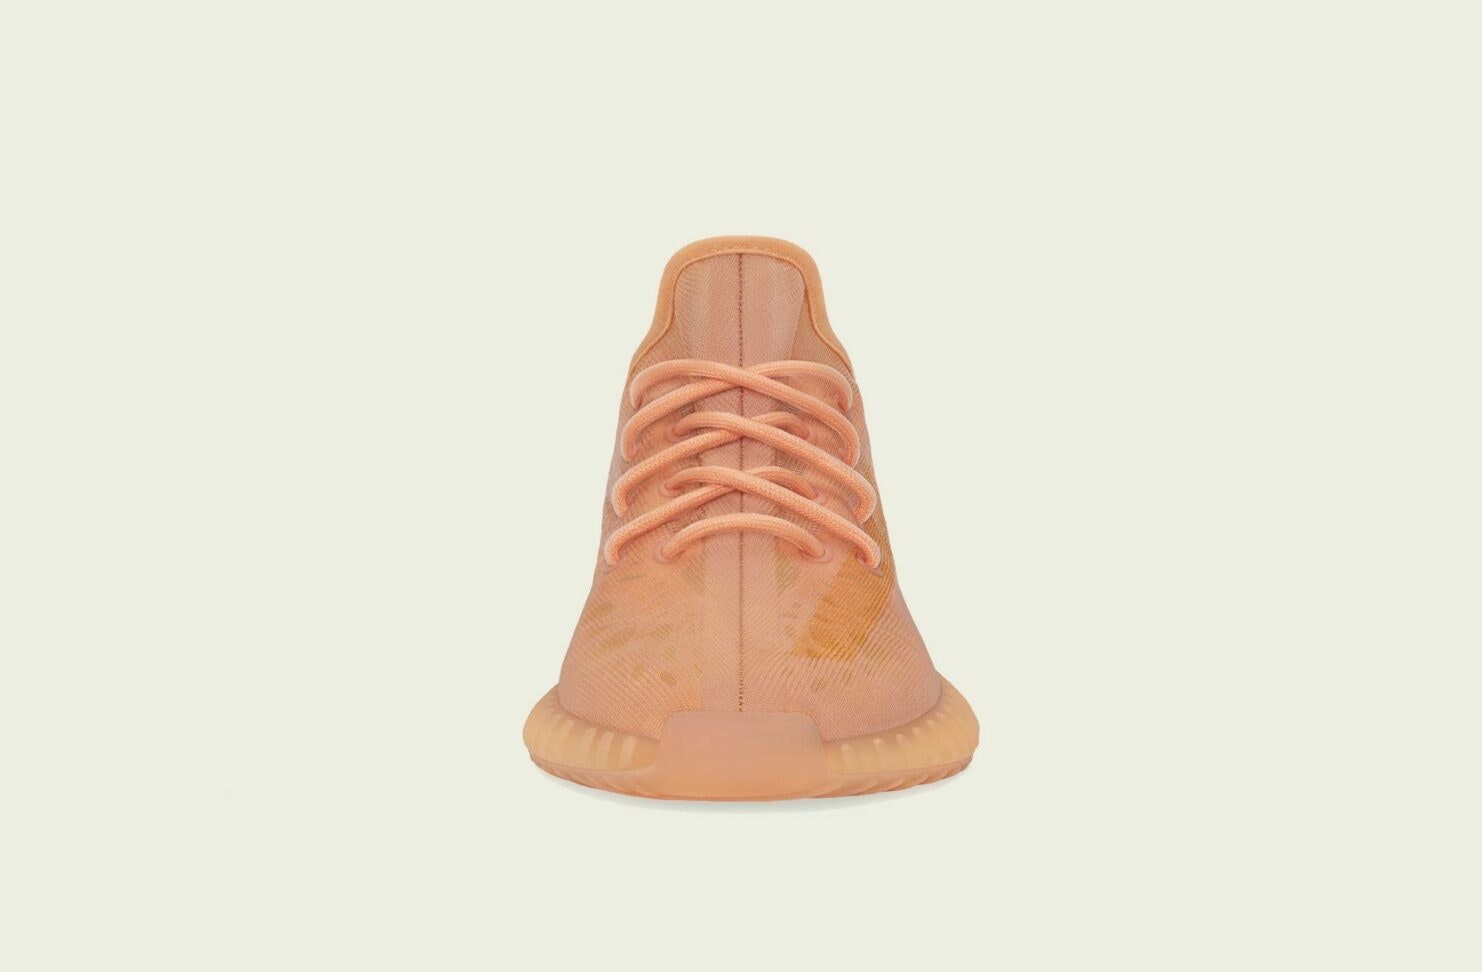 adidas Yeezy Boost 350 V2 “Mono Clay” (Asia excl.)